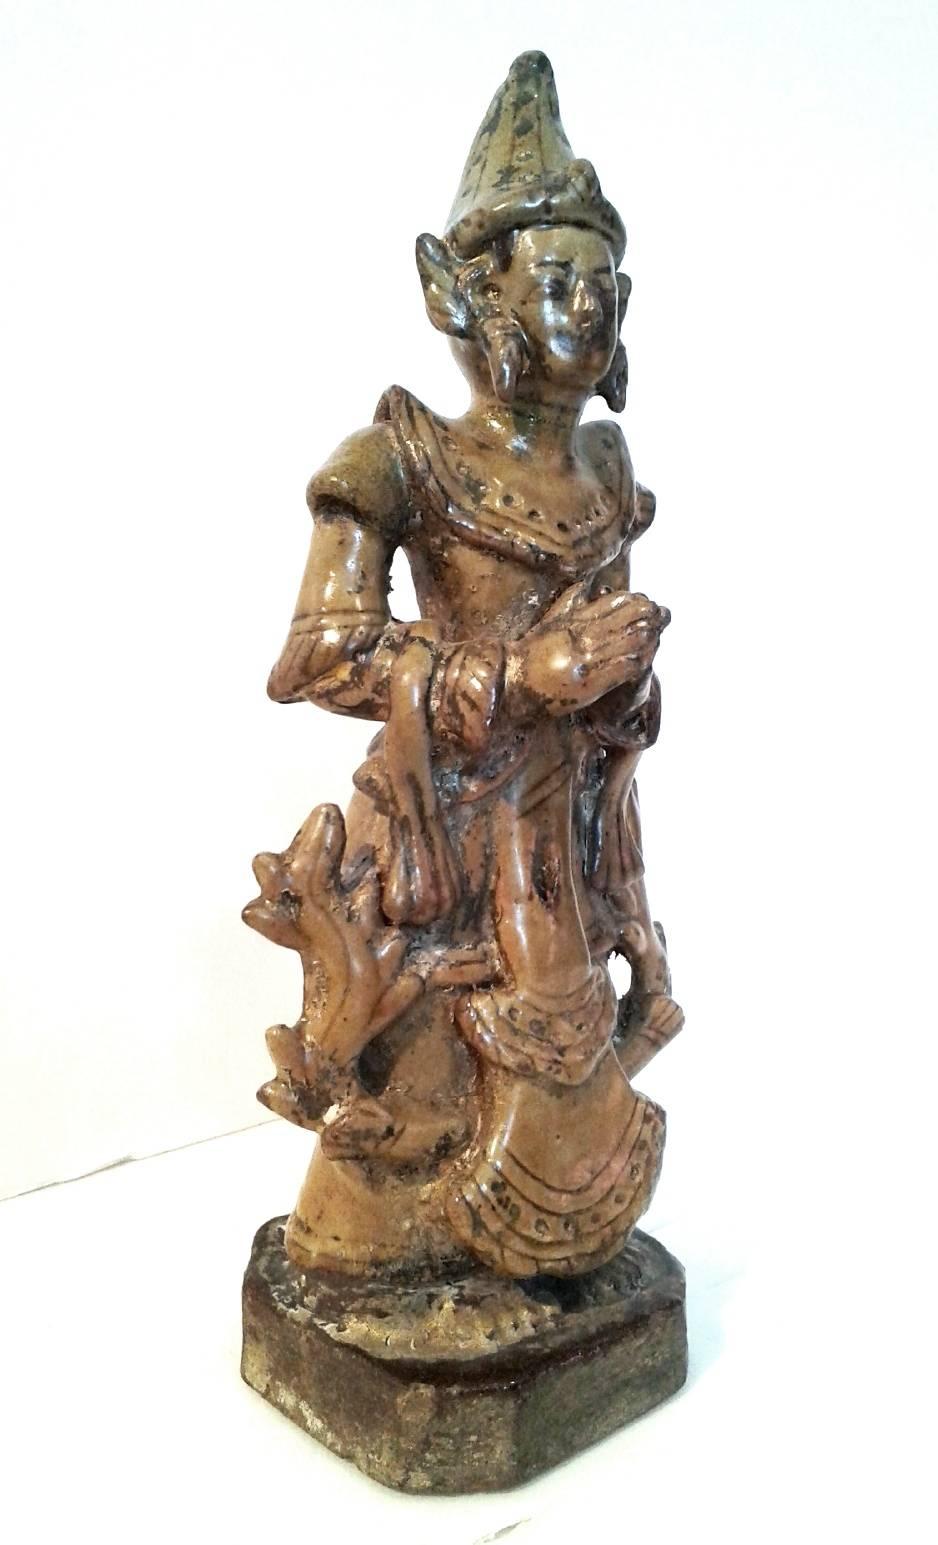 A Thai angel statue made of solid ceramic, from old Burma (Myanmar). Intricate details and etching make this vintage piece a curiosity.